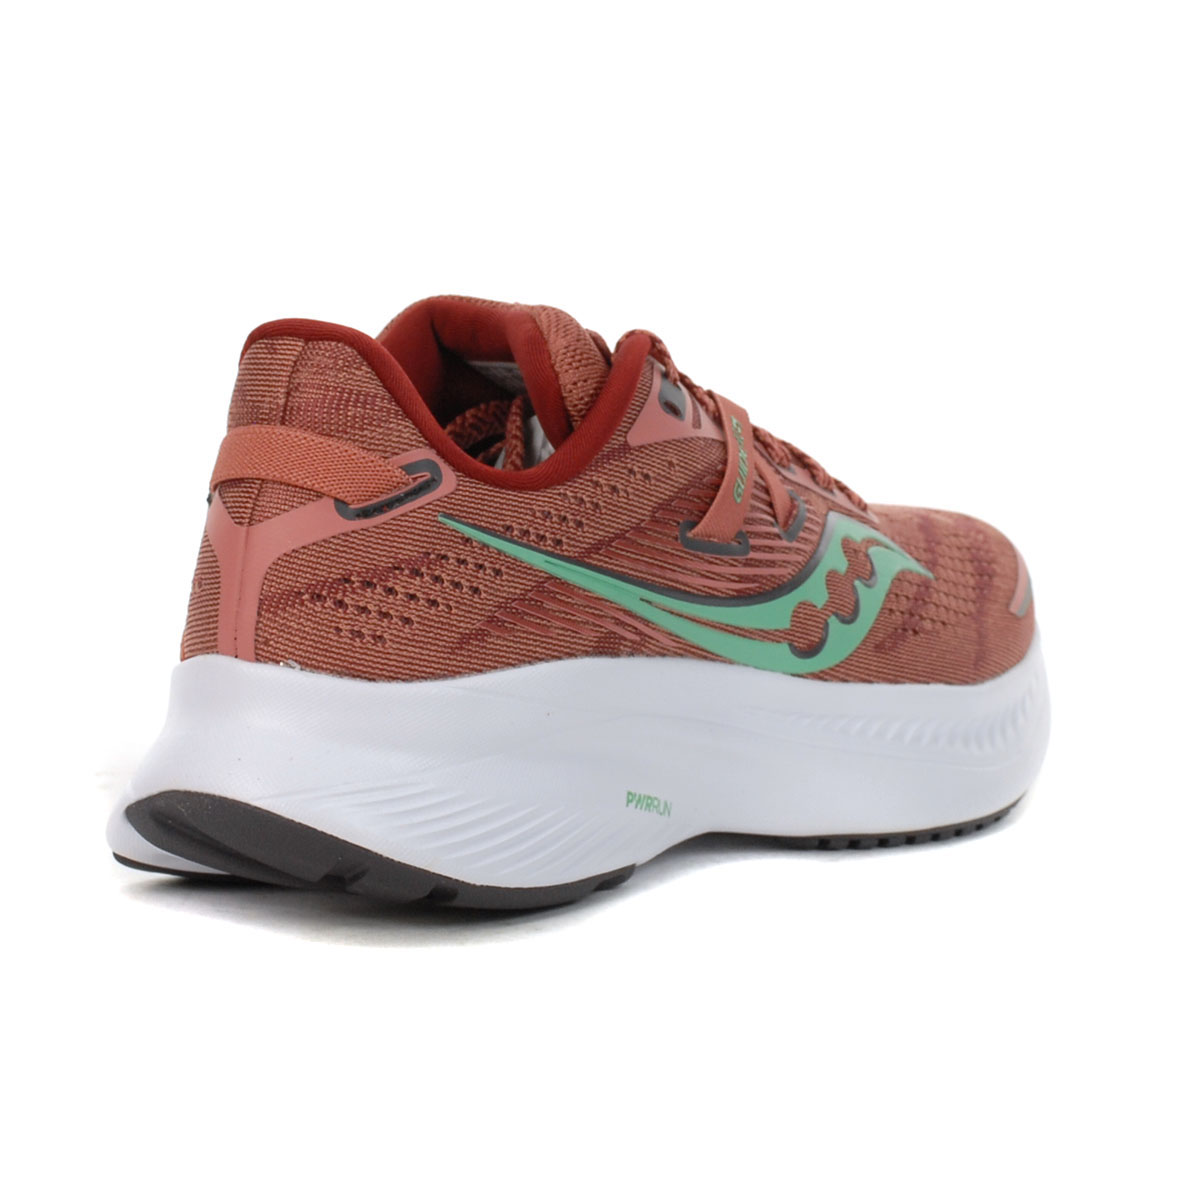 Saucony Women's Guide 16 Soot/Sprig Running Shoes S10810-25 - WOOKI.COM